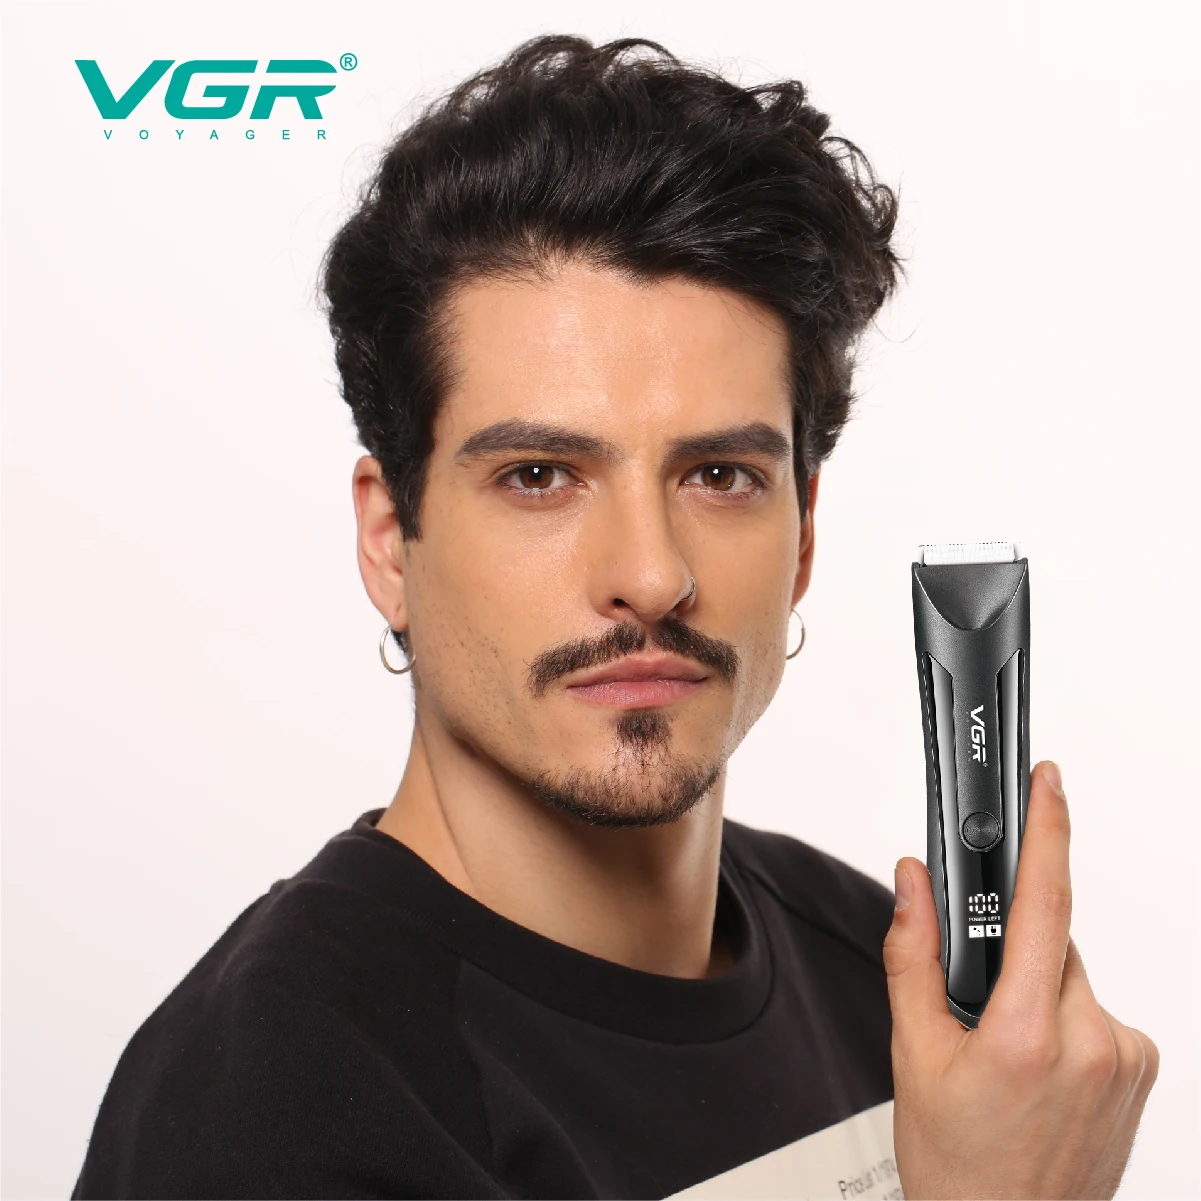 VGR Hair Trimmer Professional Hair Clipper Barber Hair Cutting Machine Cordless Electri Rechargeable Beard Trimmer for Men V-951 enlarge